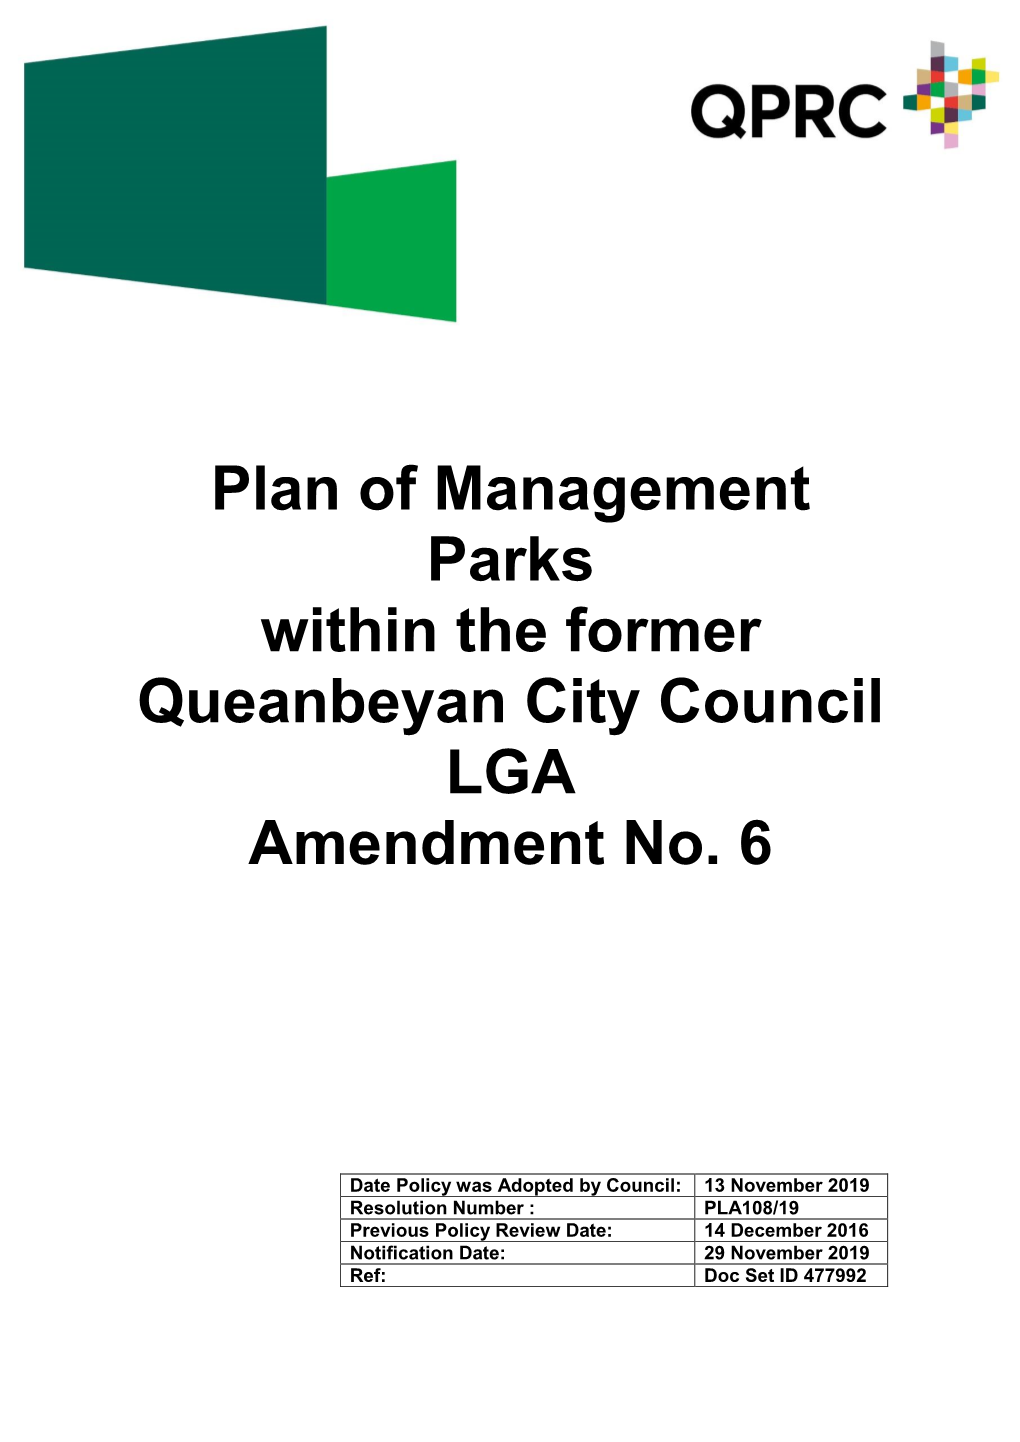 Plan of Management Parks Within the Former Queanbeyan City Council LGA Amendment No